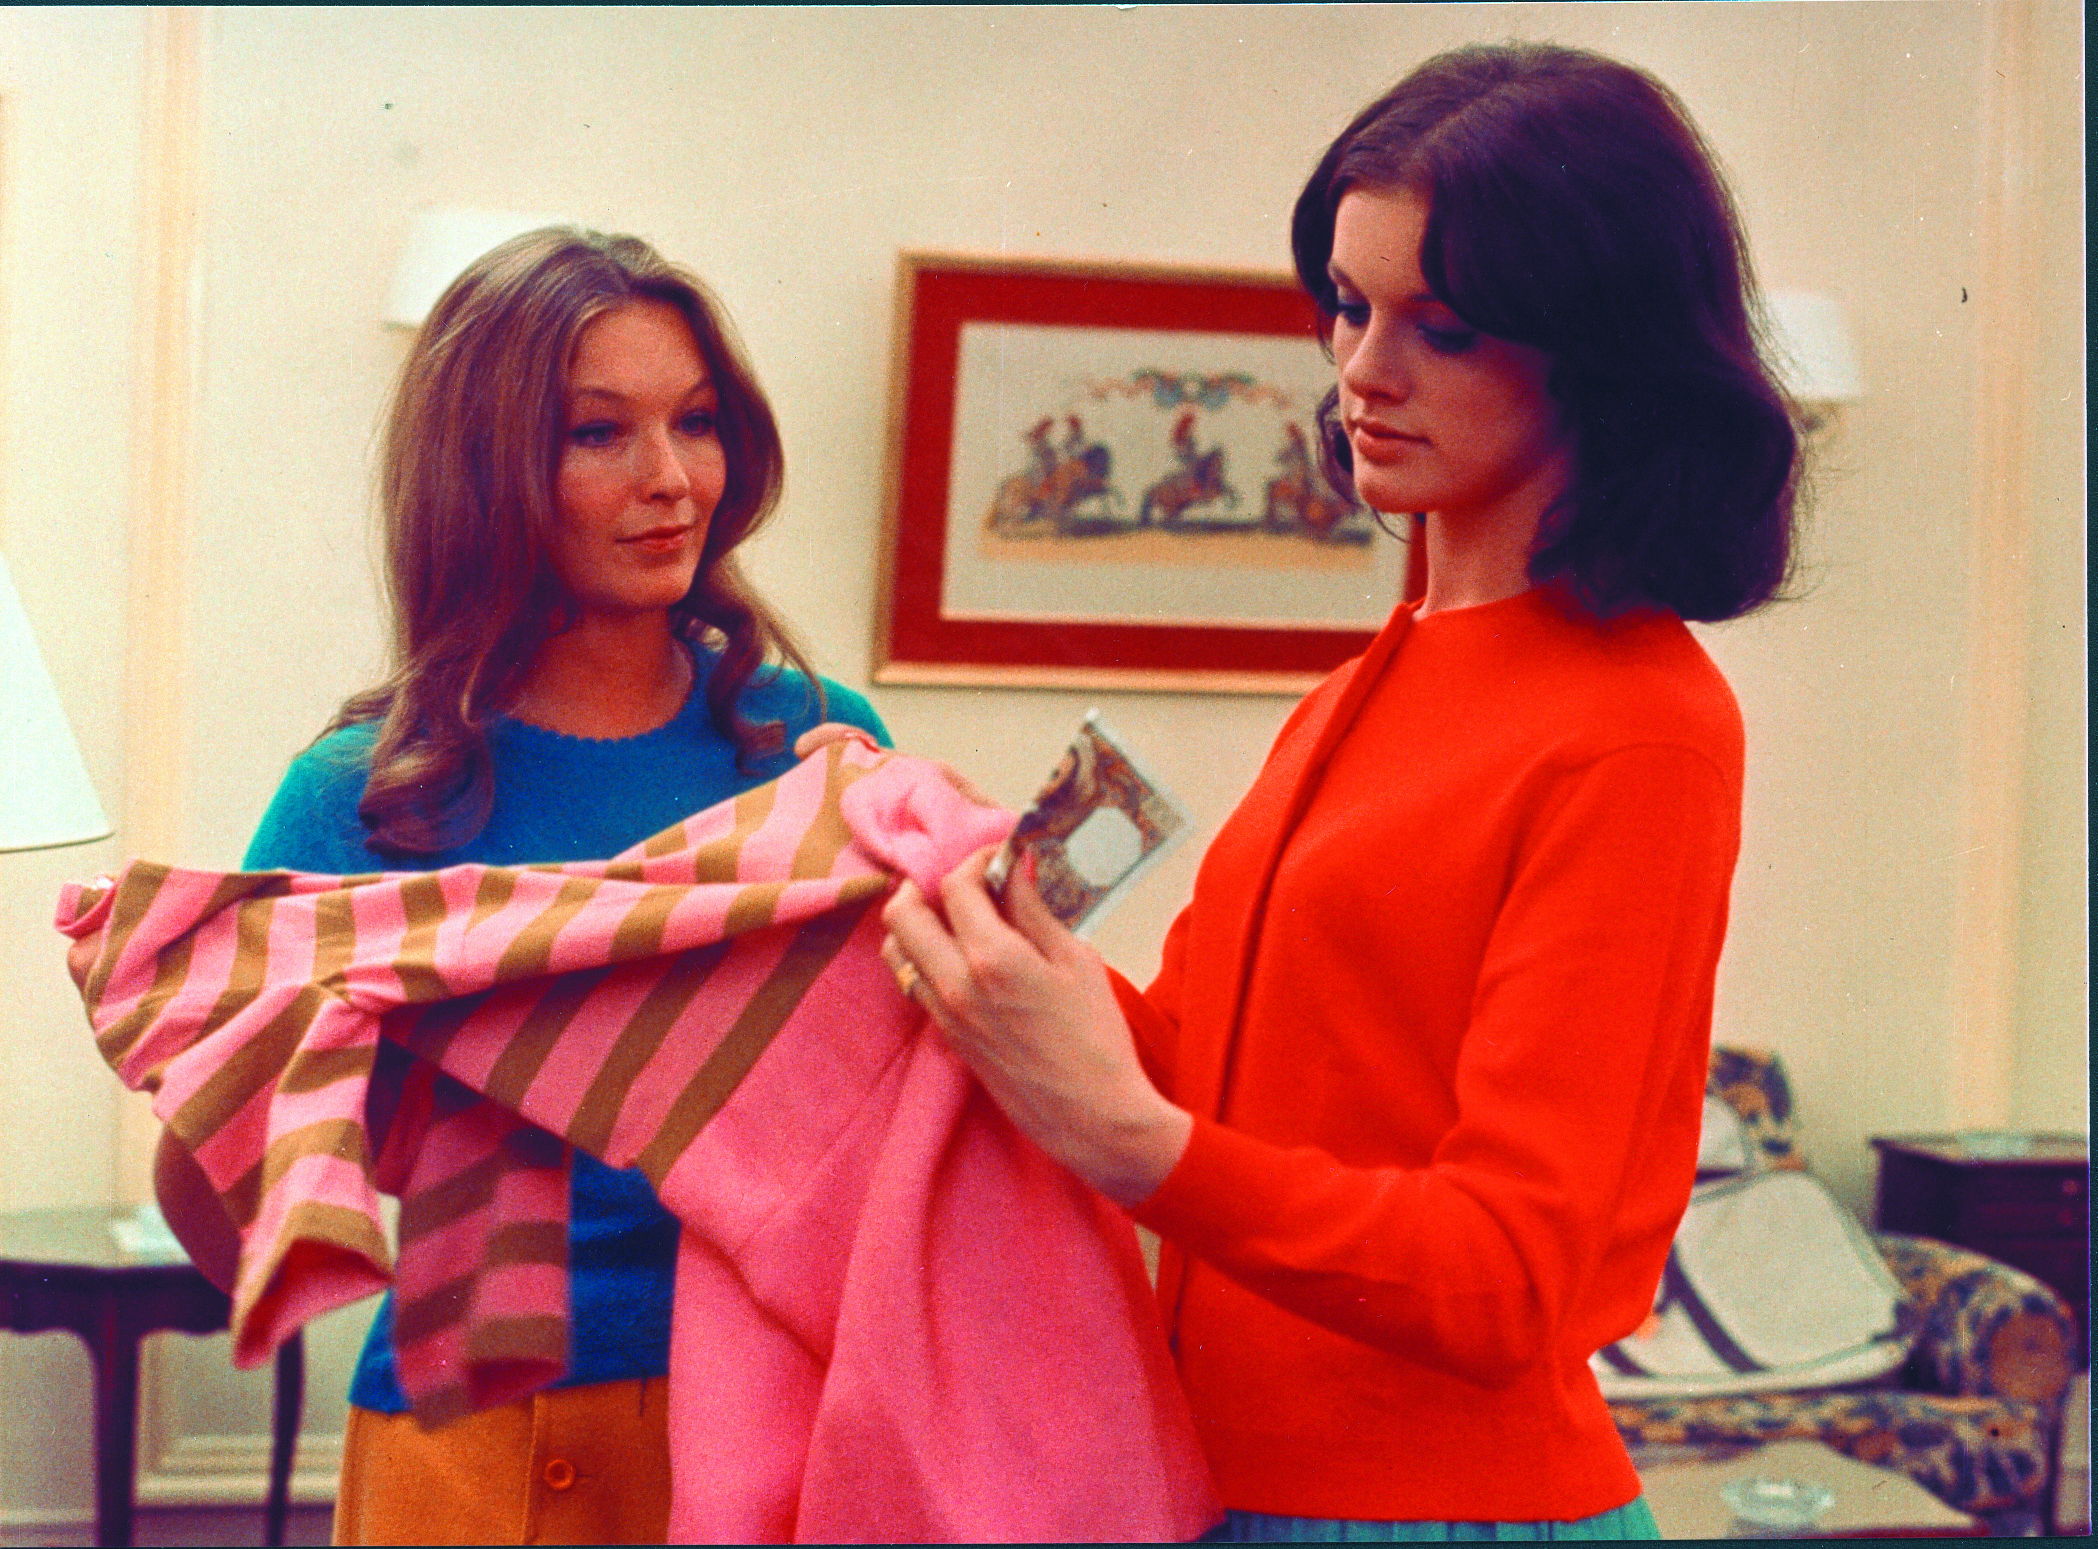 Still of Anny Duperey and Marina Vlady in 2 ou 3 choses que je sais d'elle (1967)